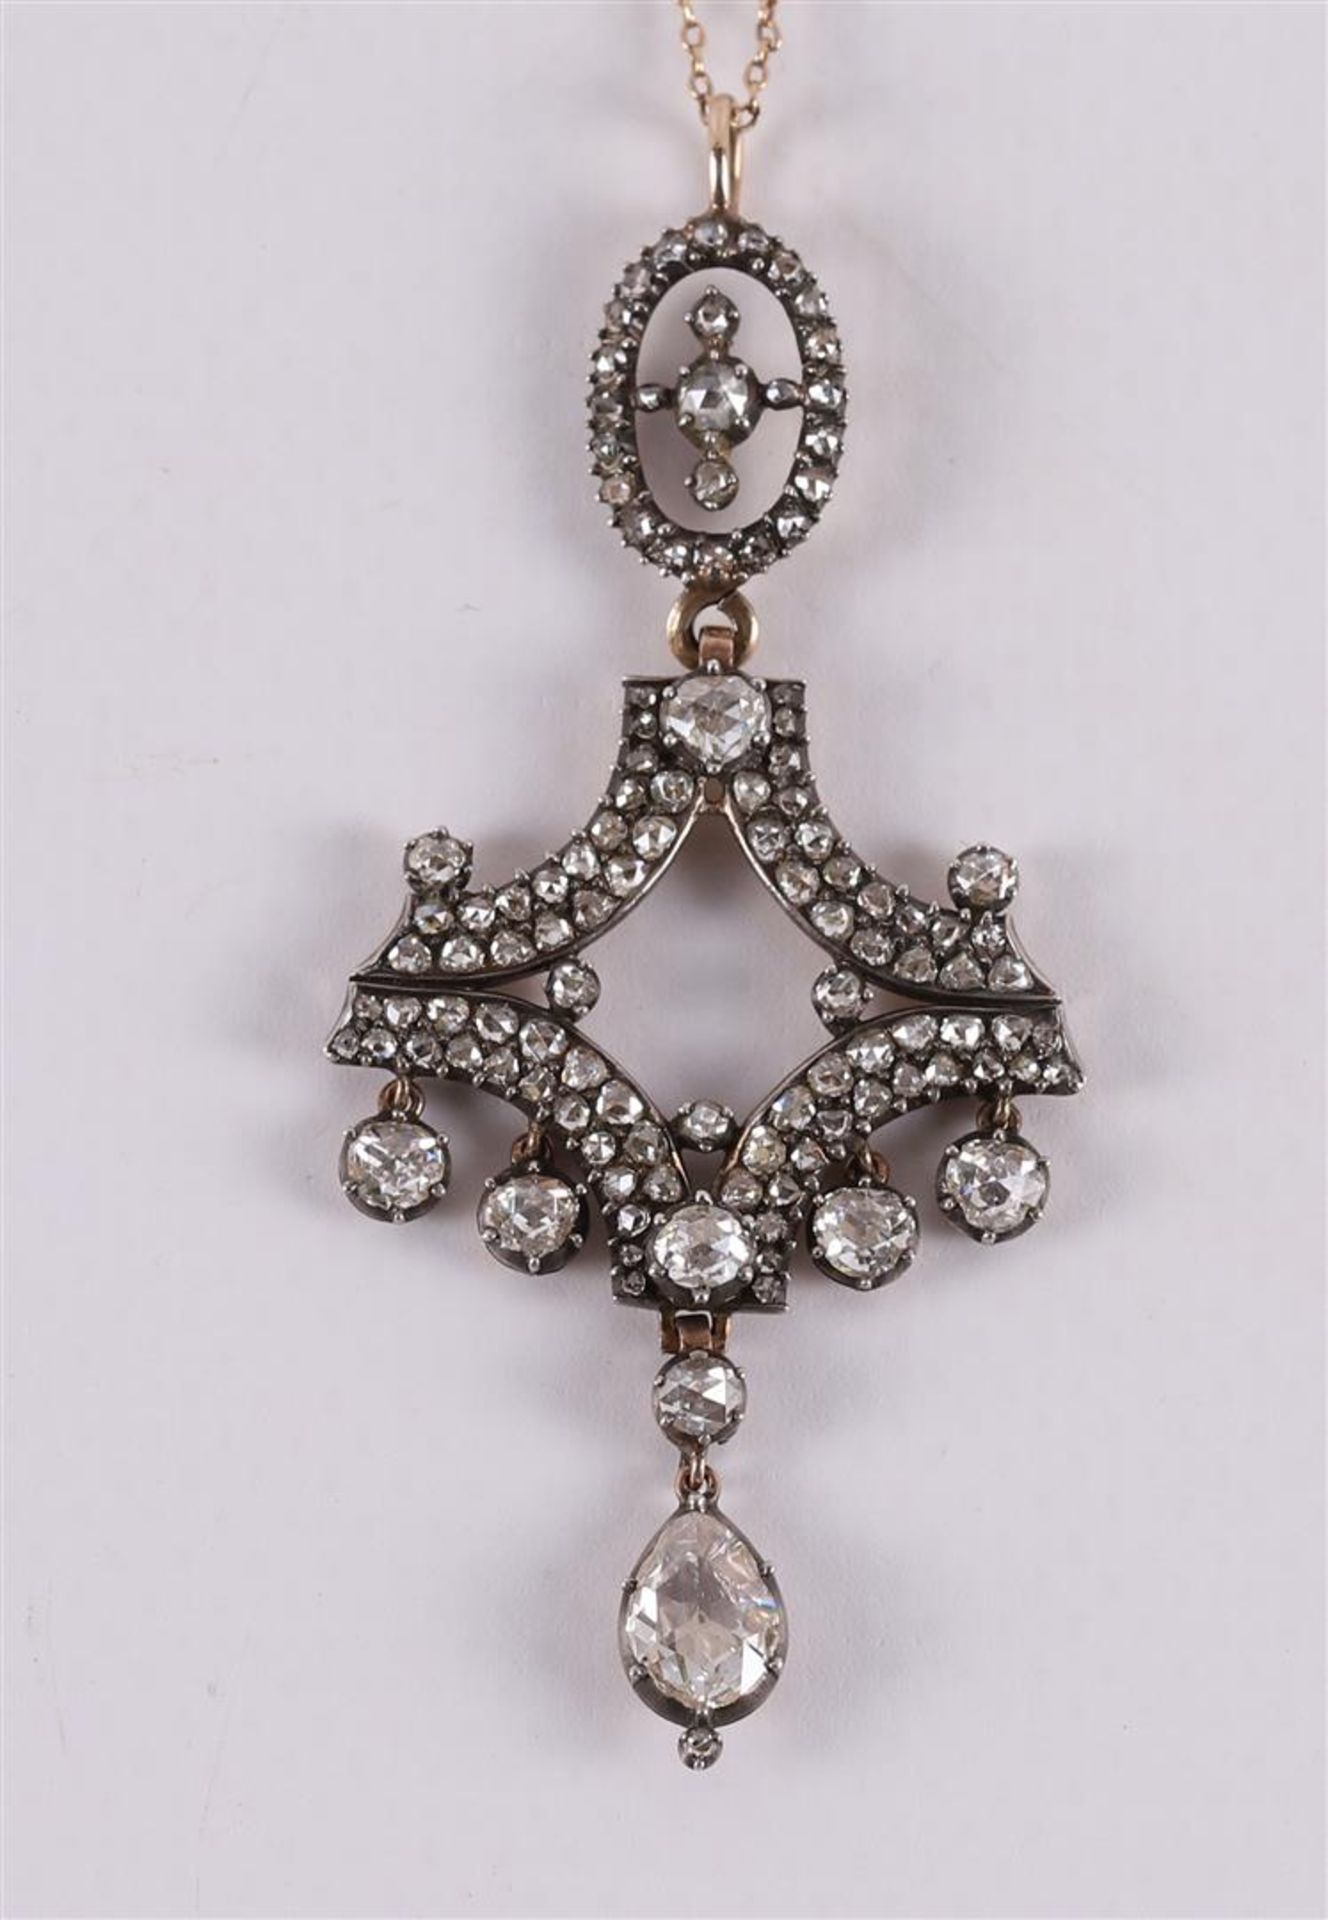 A silver-on-gold pedant with pearshape cut diamond on a necklace - Bild 2 aus 3